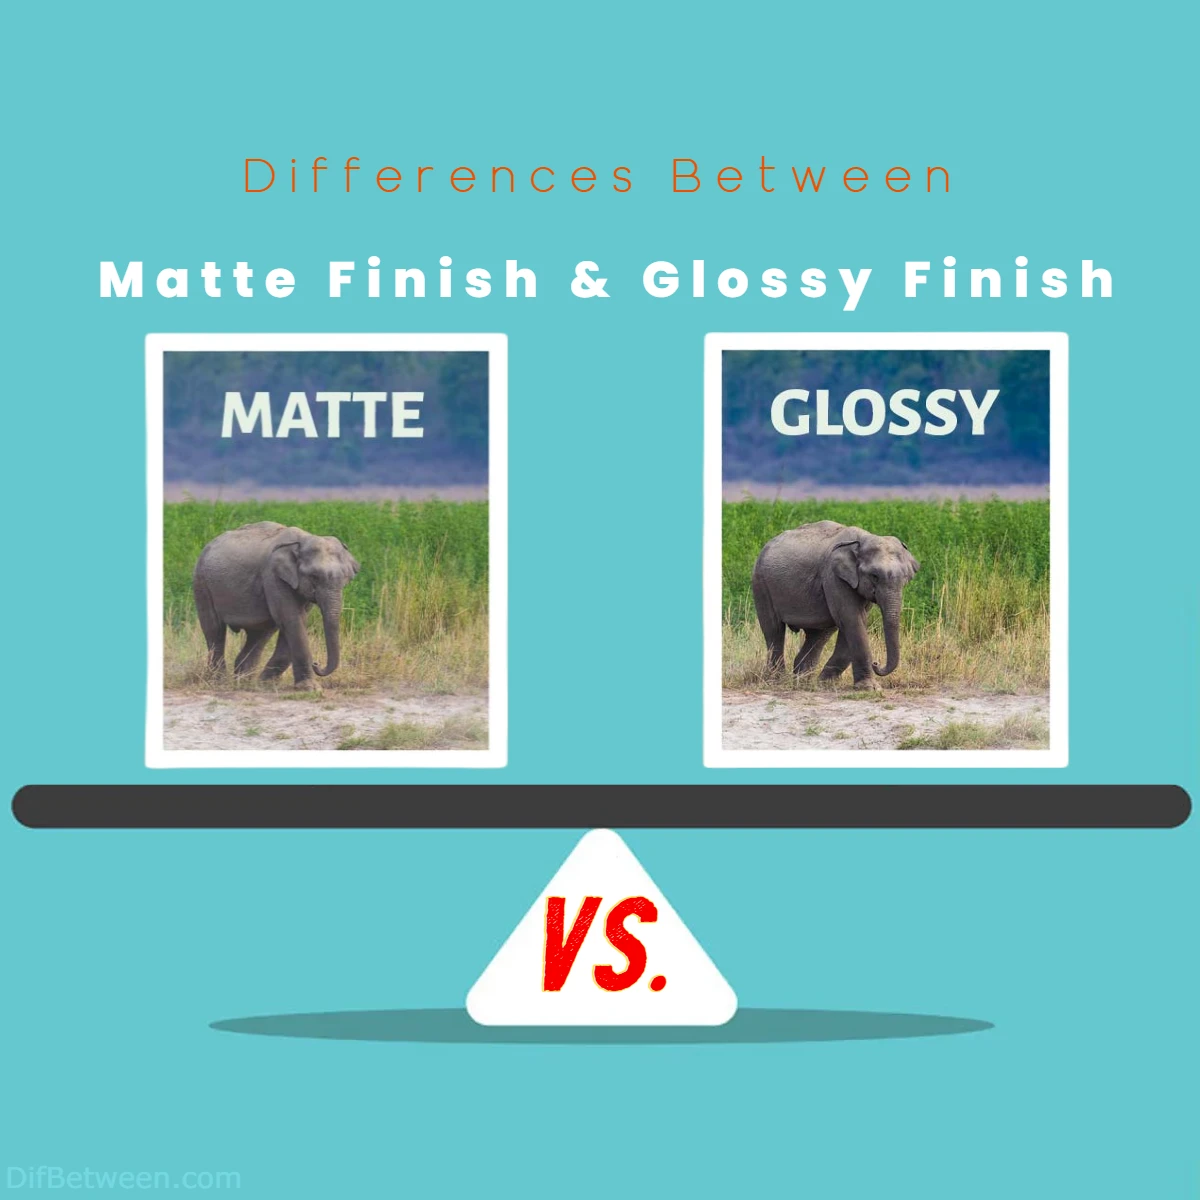 Differences Between Matte Finish vs Glossy Finish